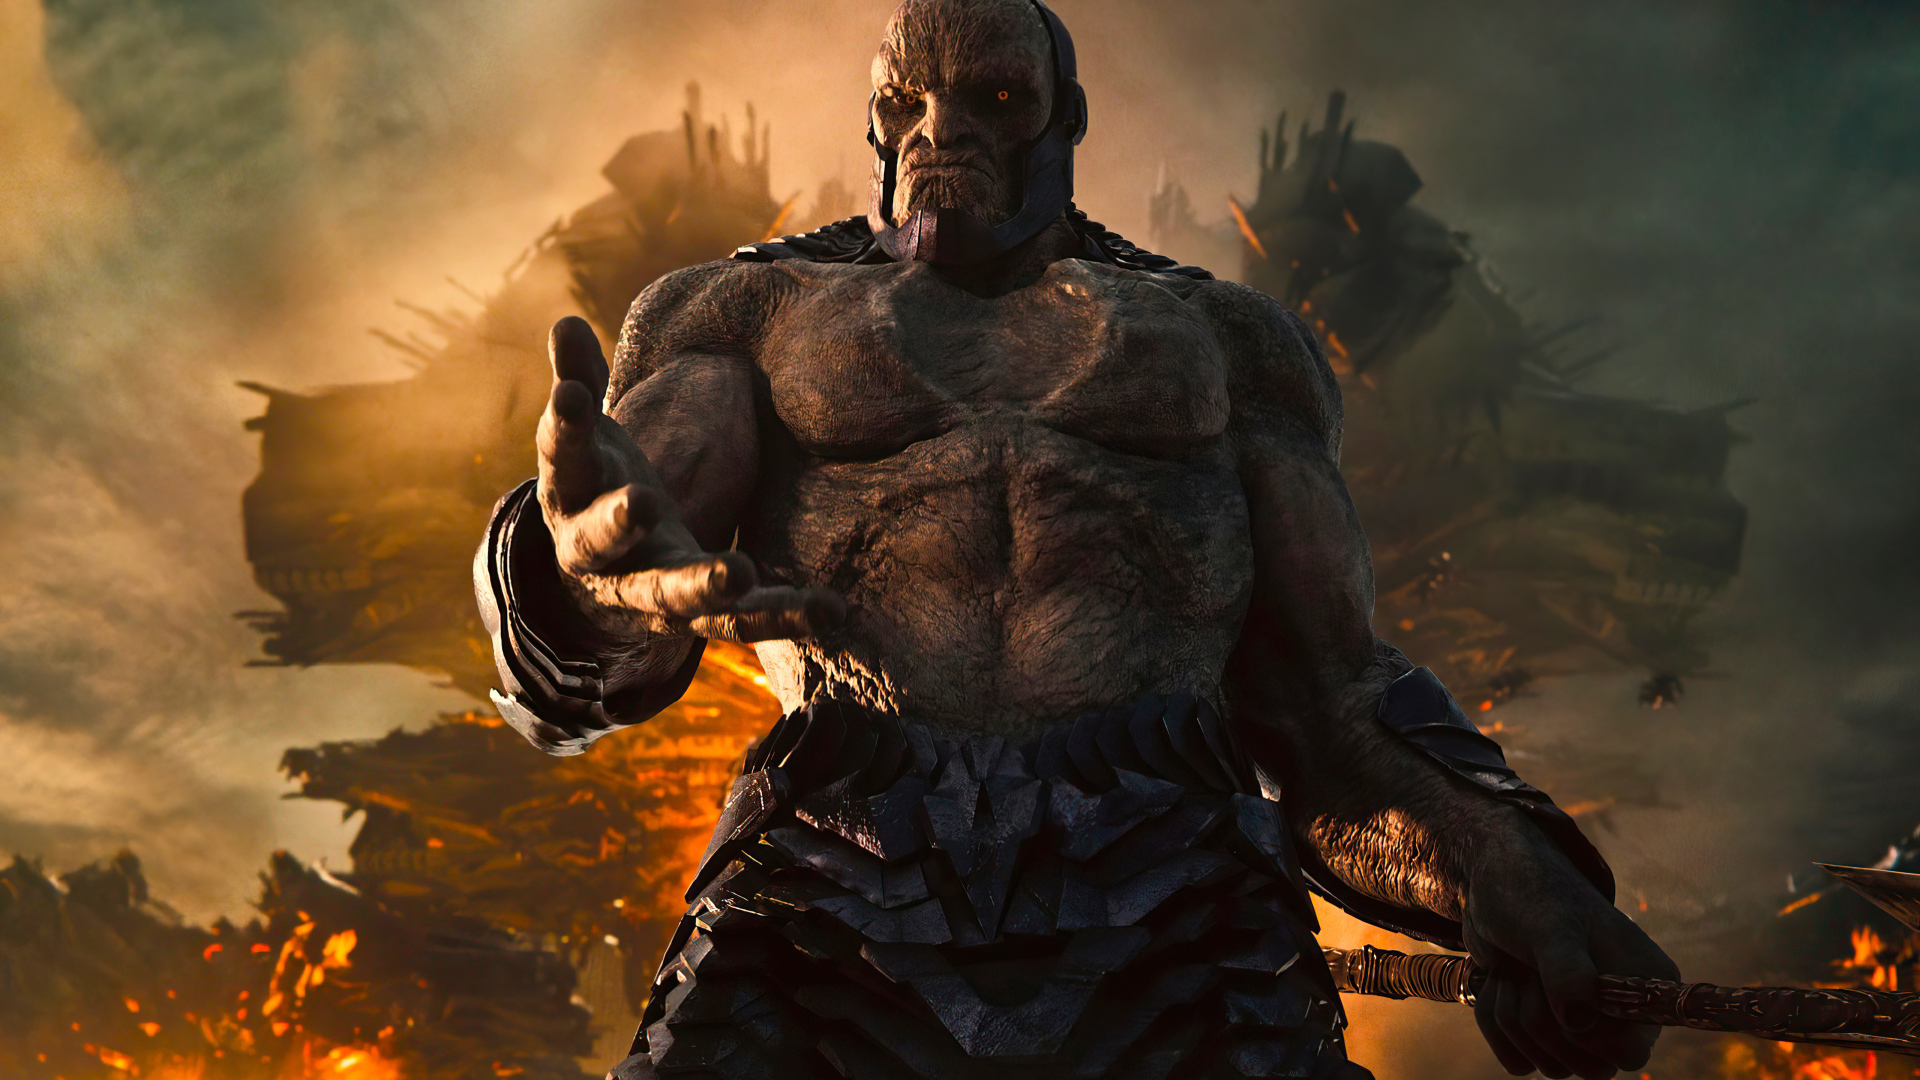 Darkseid character in the movie Justice League Zach Snyder, 2021